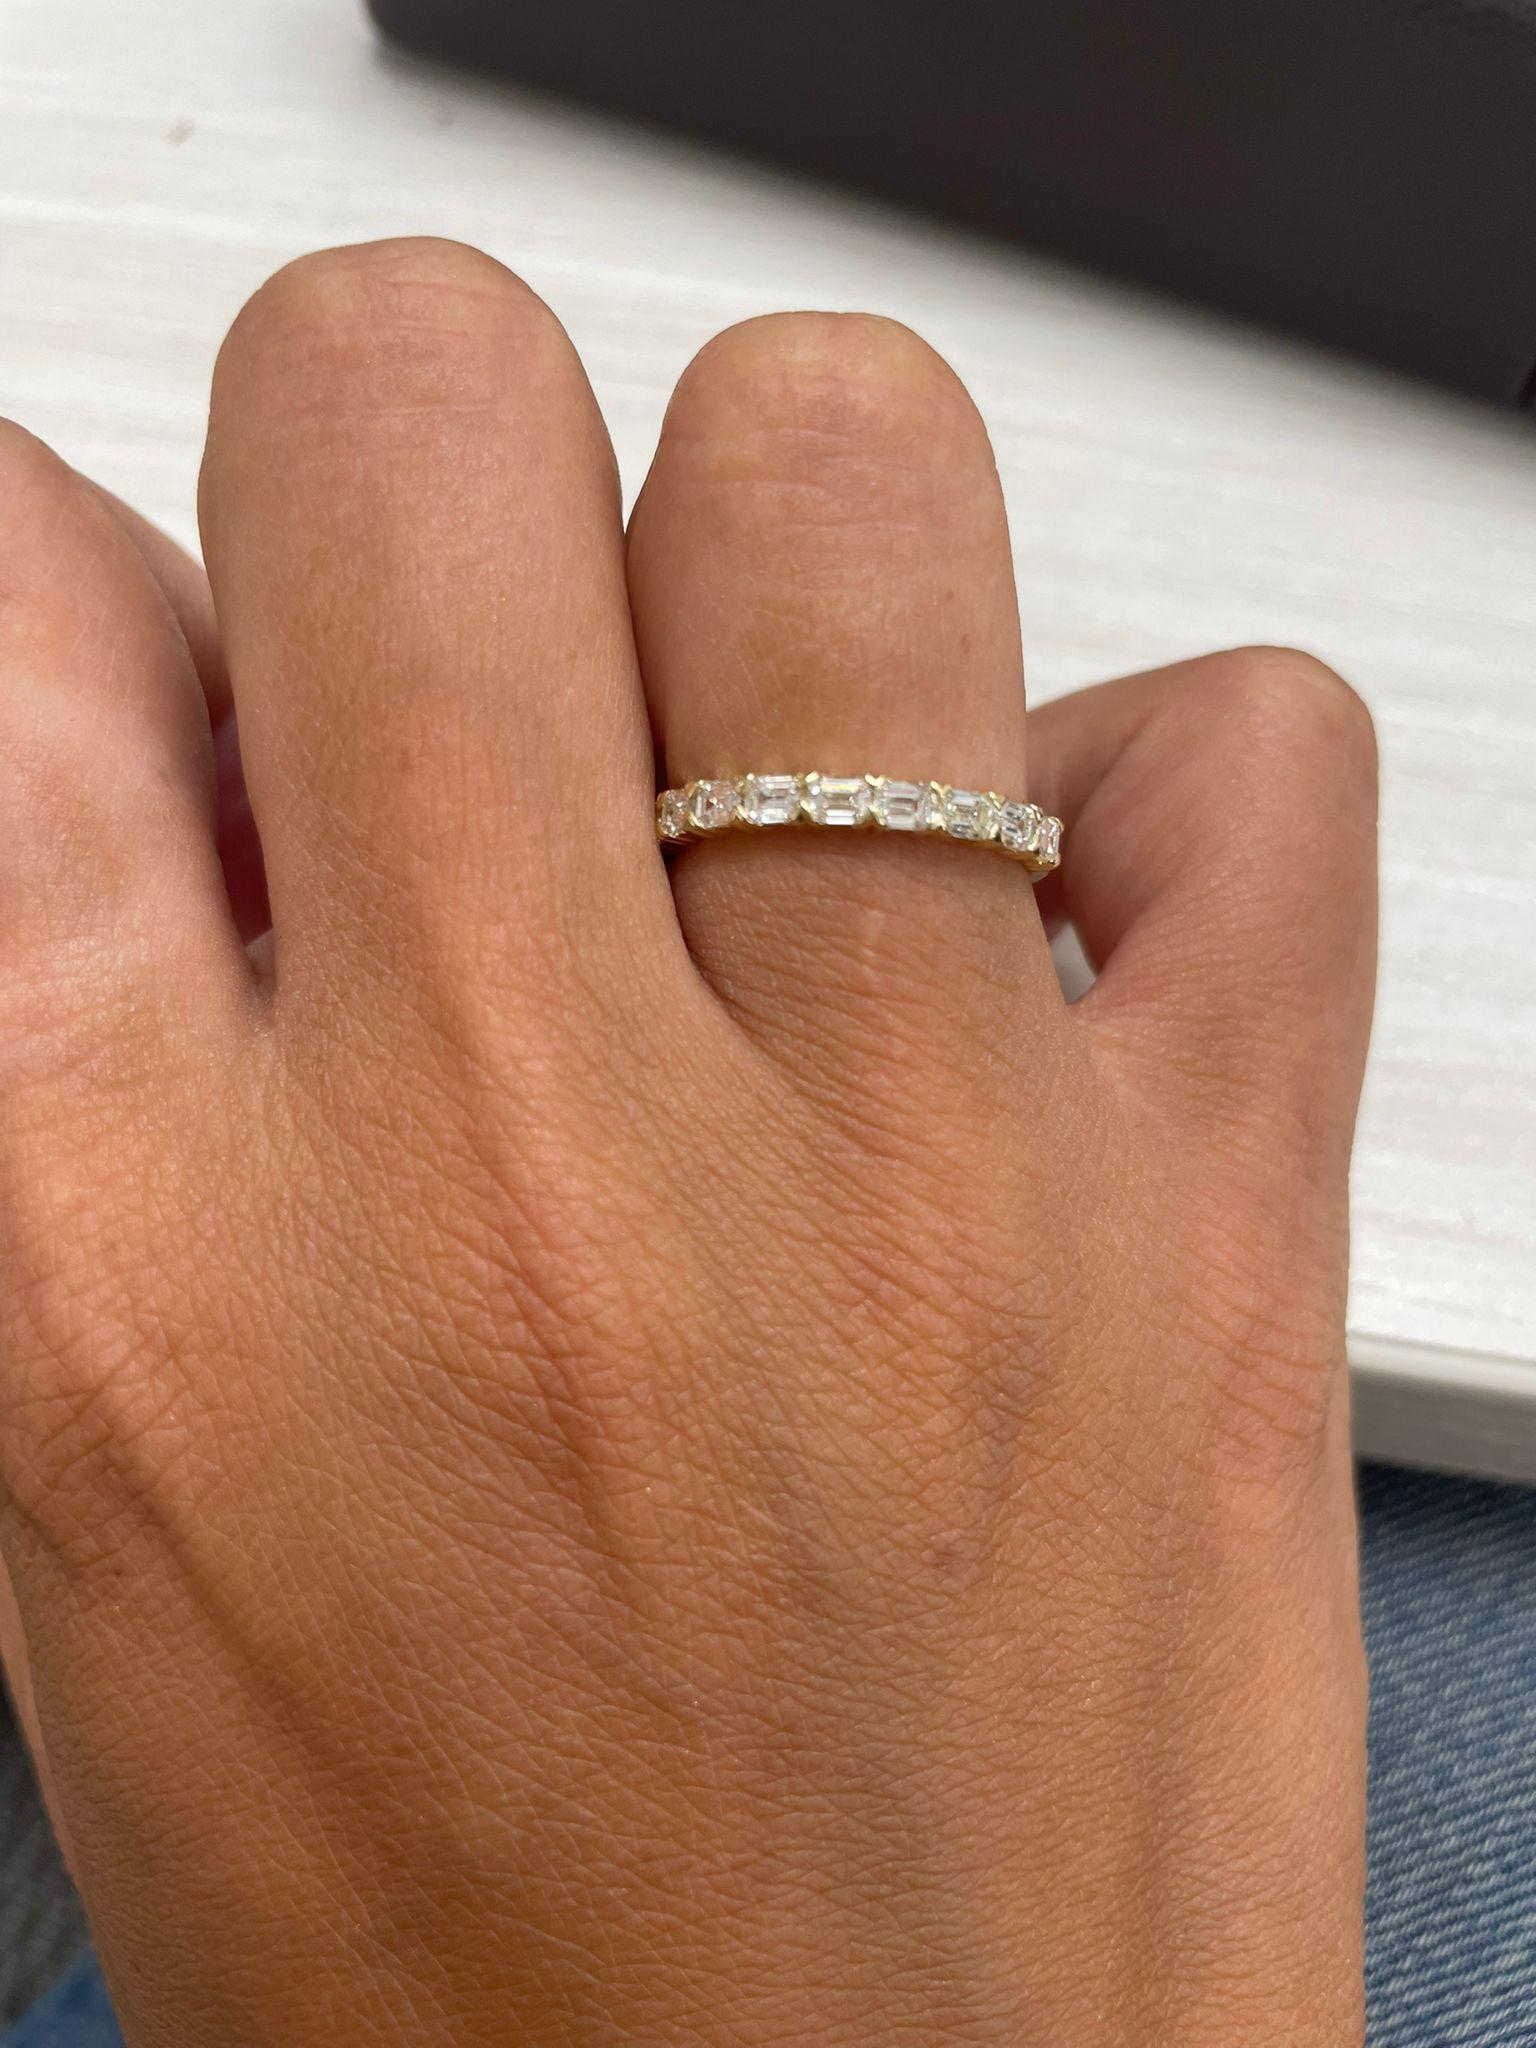 Bring the brilliance of diamonds to your everyday style! Sparkling and light, this gorgeous ring glistens with diamonds in a compelling pattern over the top. Sleek and chic, it pairs with just about anything in your closet and have you looking